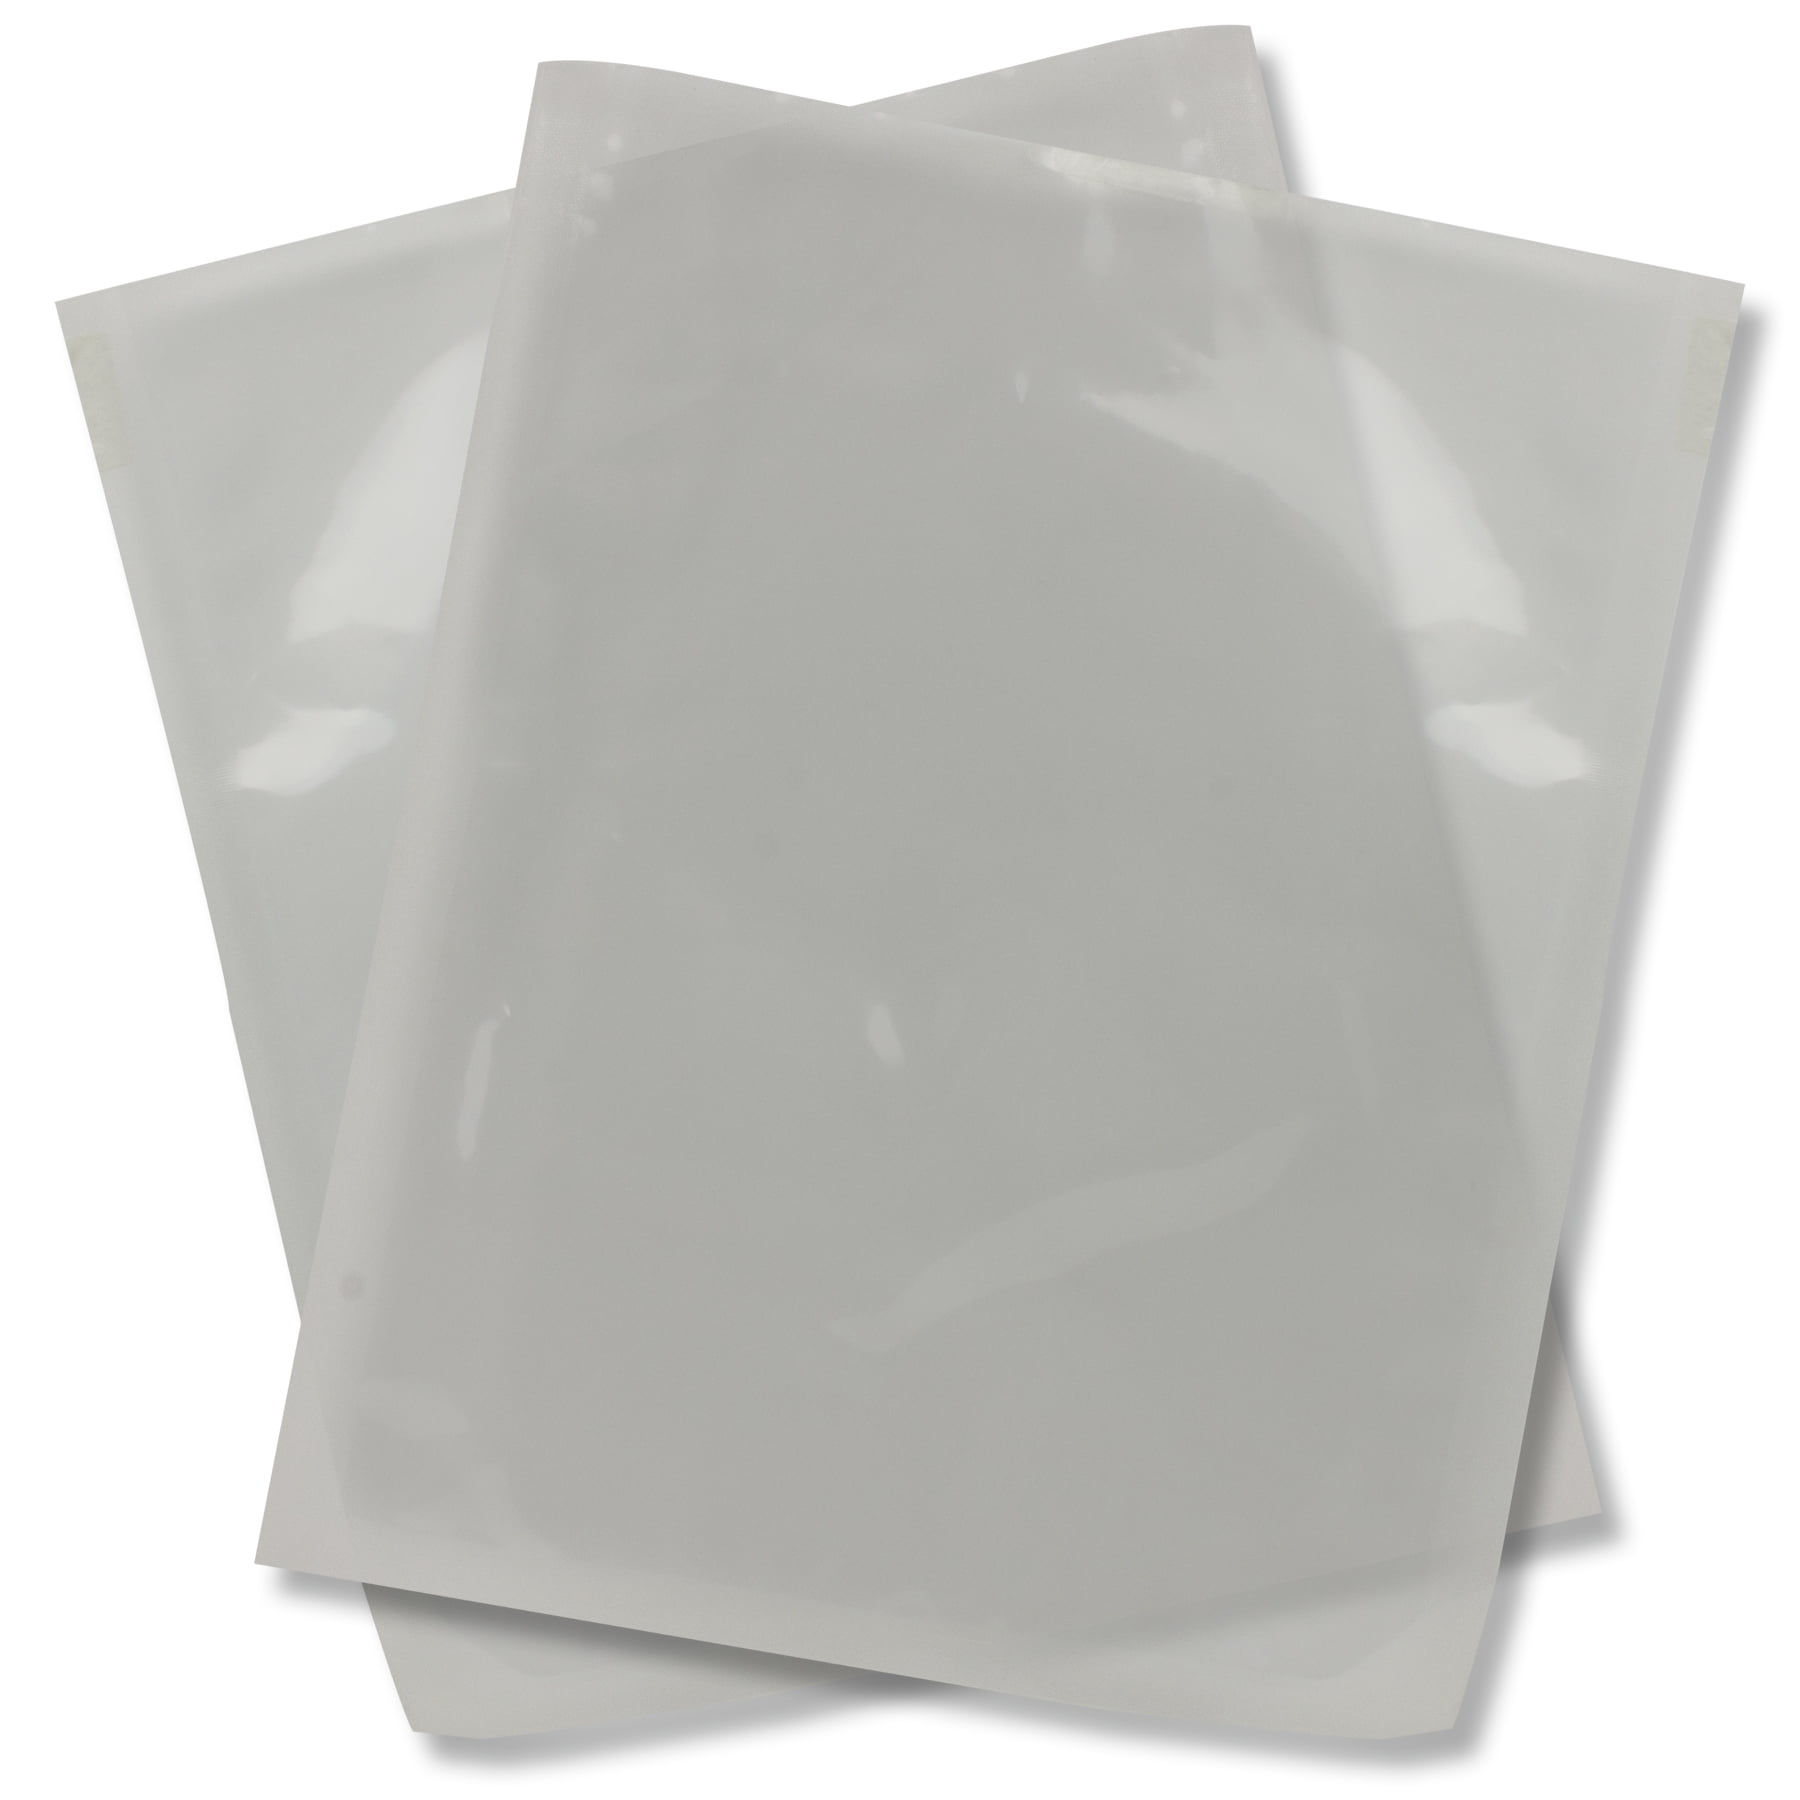 Sous Vide 4 mil Bag 8"x10" Flat Pouch for Vacuum Sealing Chamber Units, 